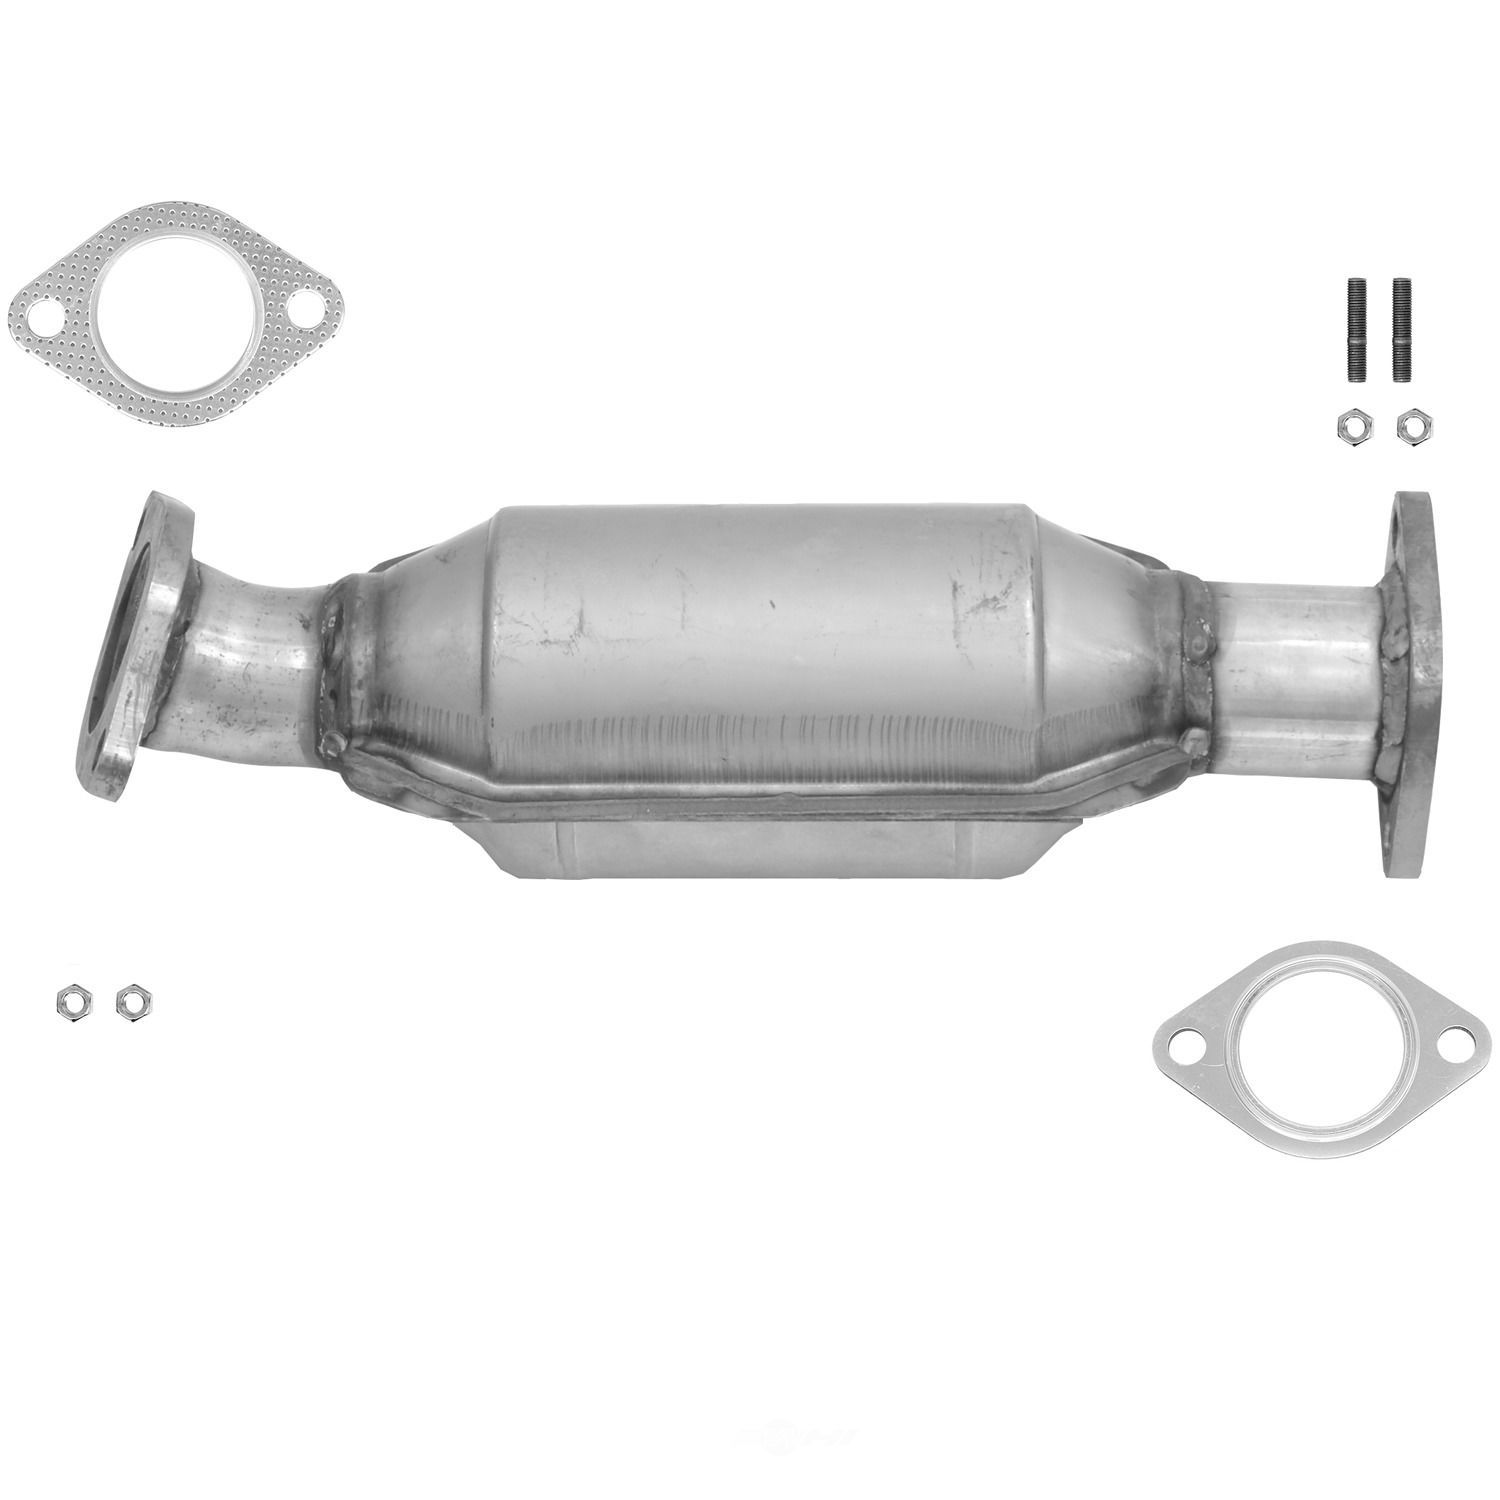 AP EXHAUST W/FEDERAL CONVERTER - Direct Fit Converter (Rear) - APF 644101